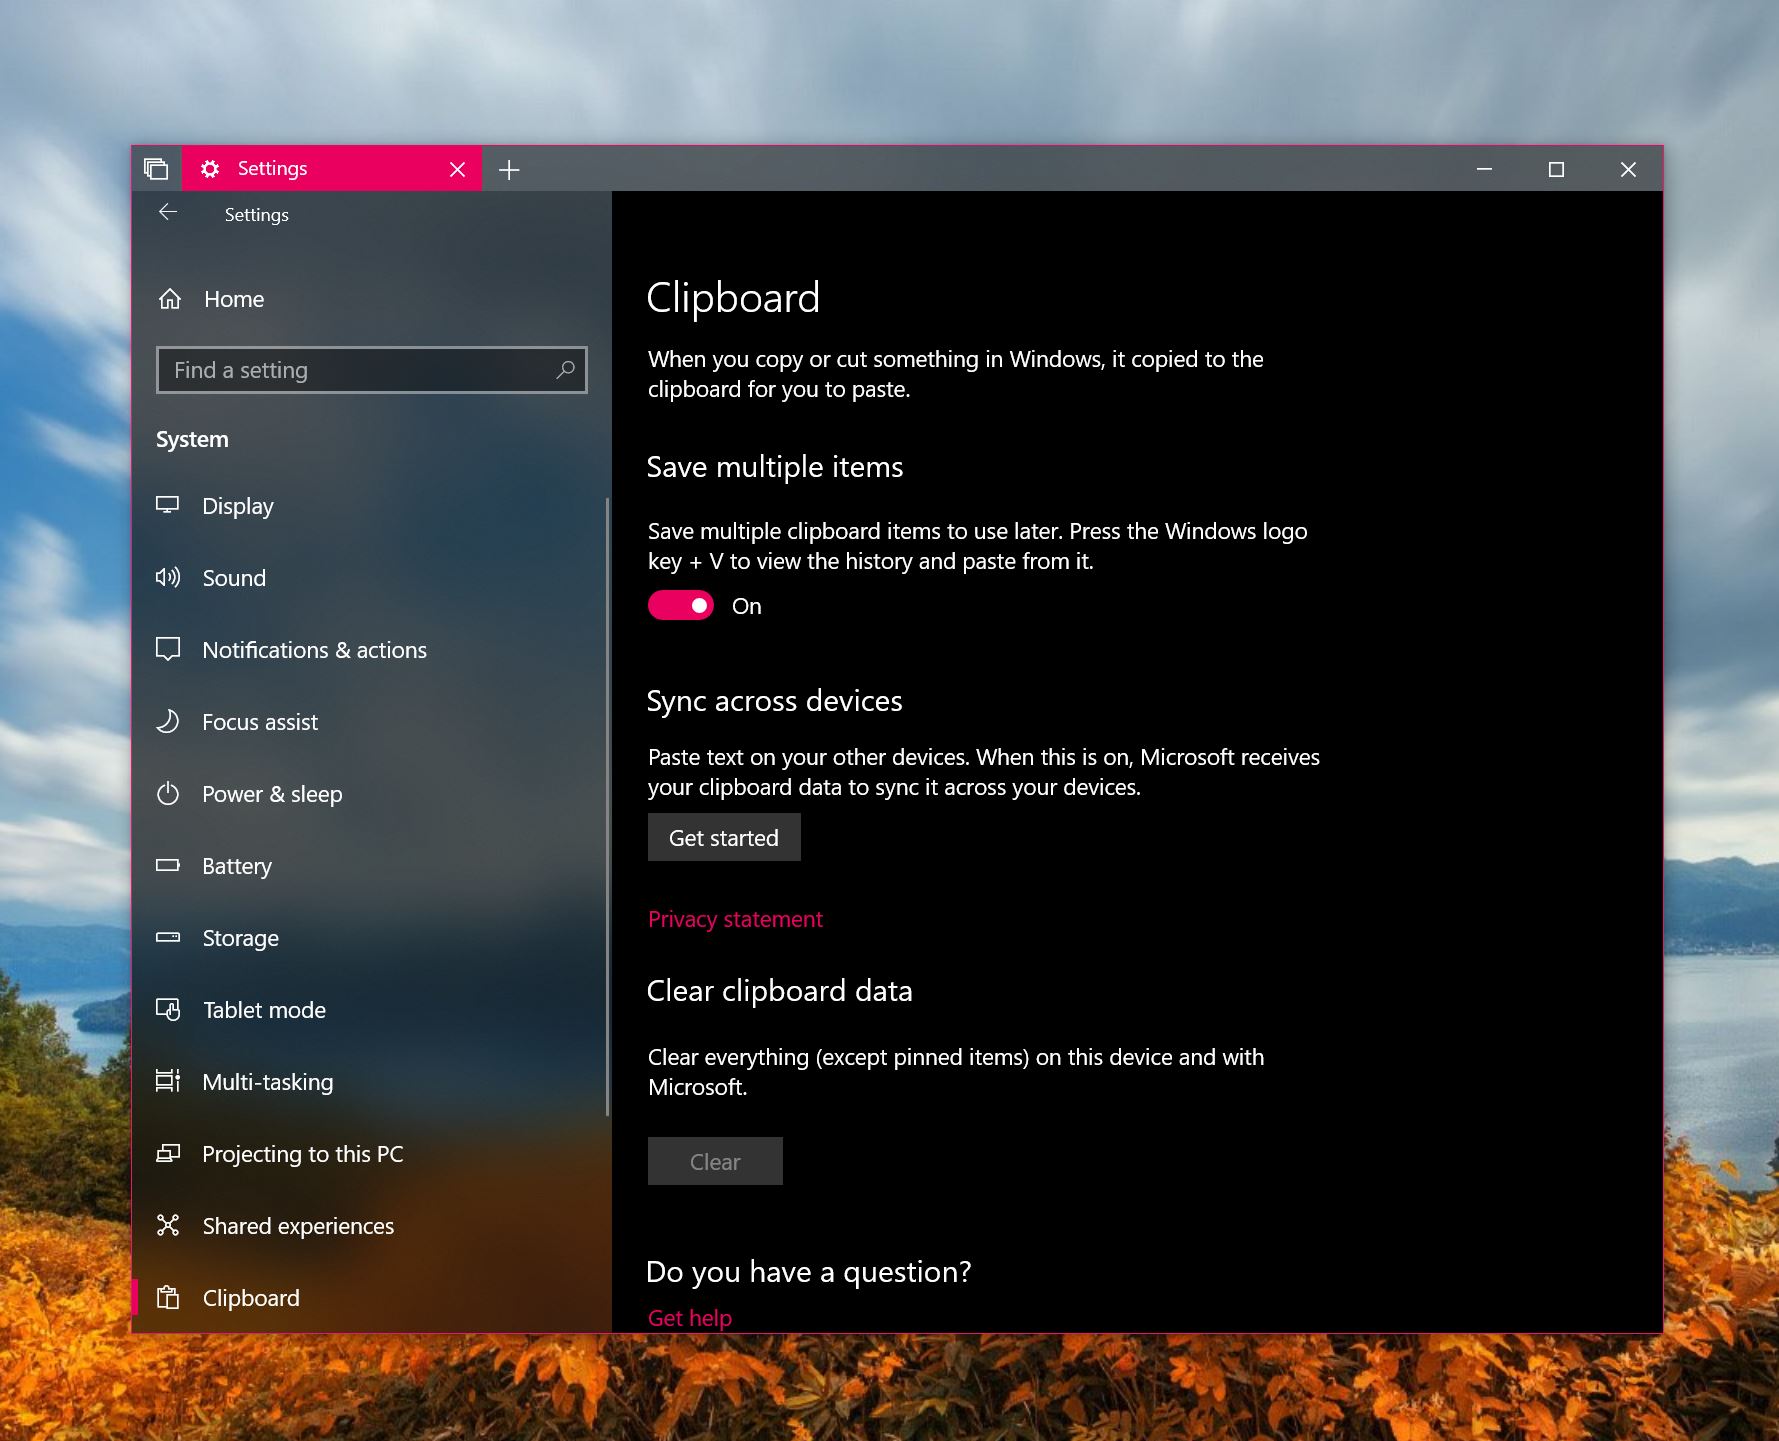 How to set up Cloud Clipboard in the Windows 10 October Update